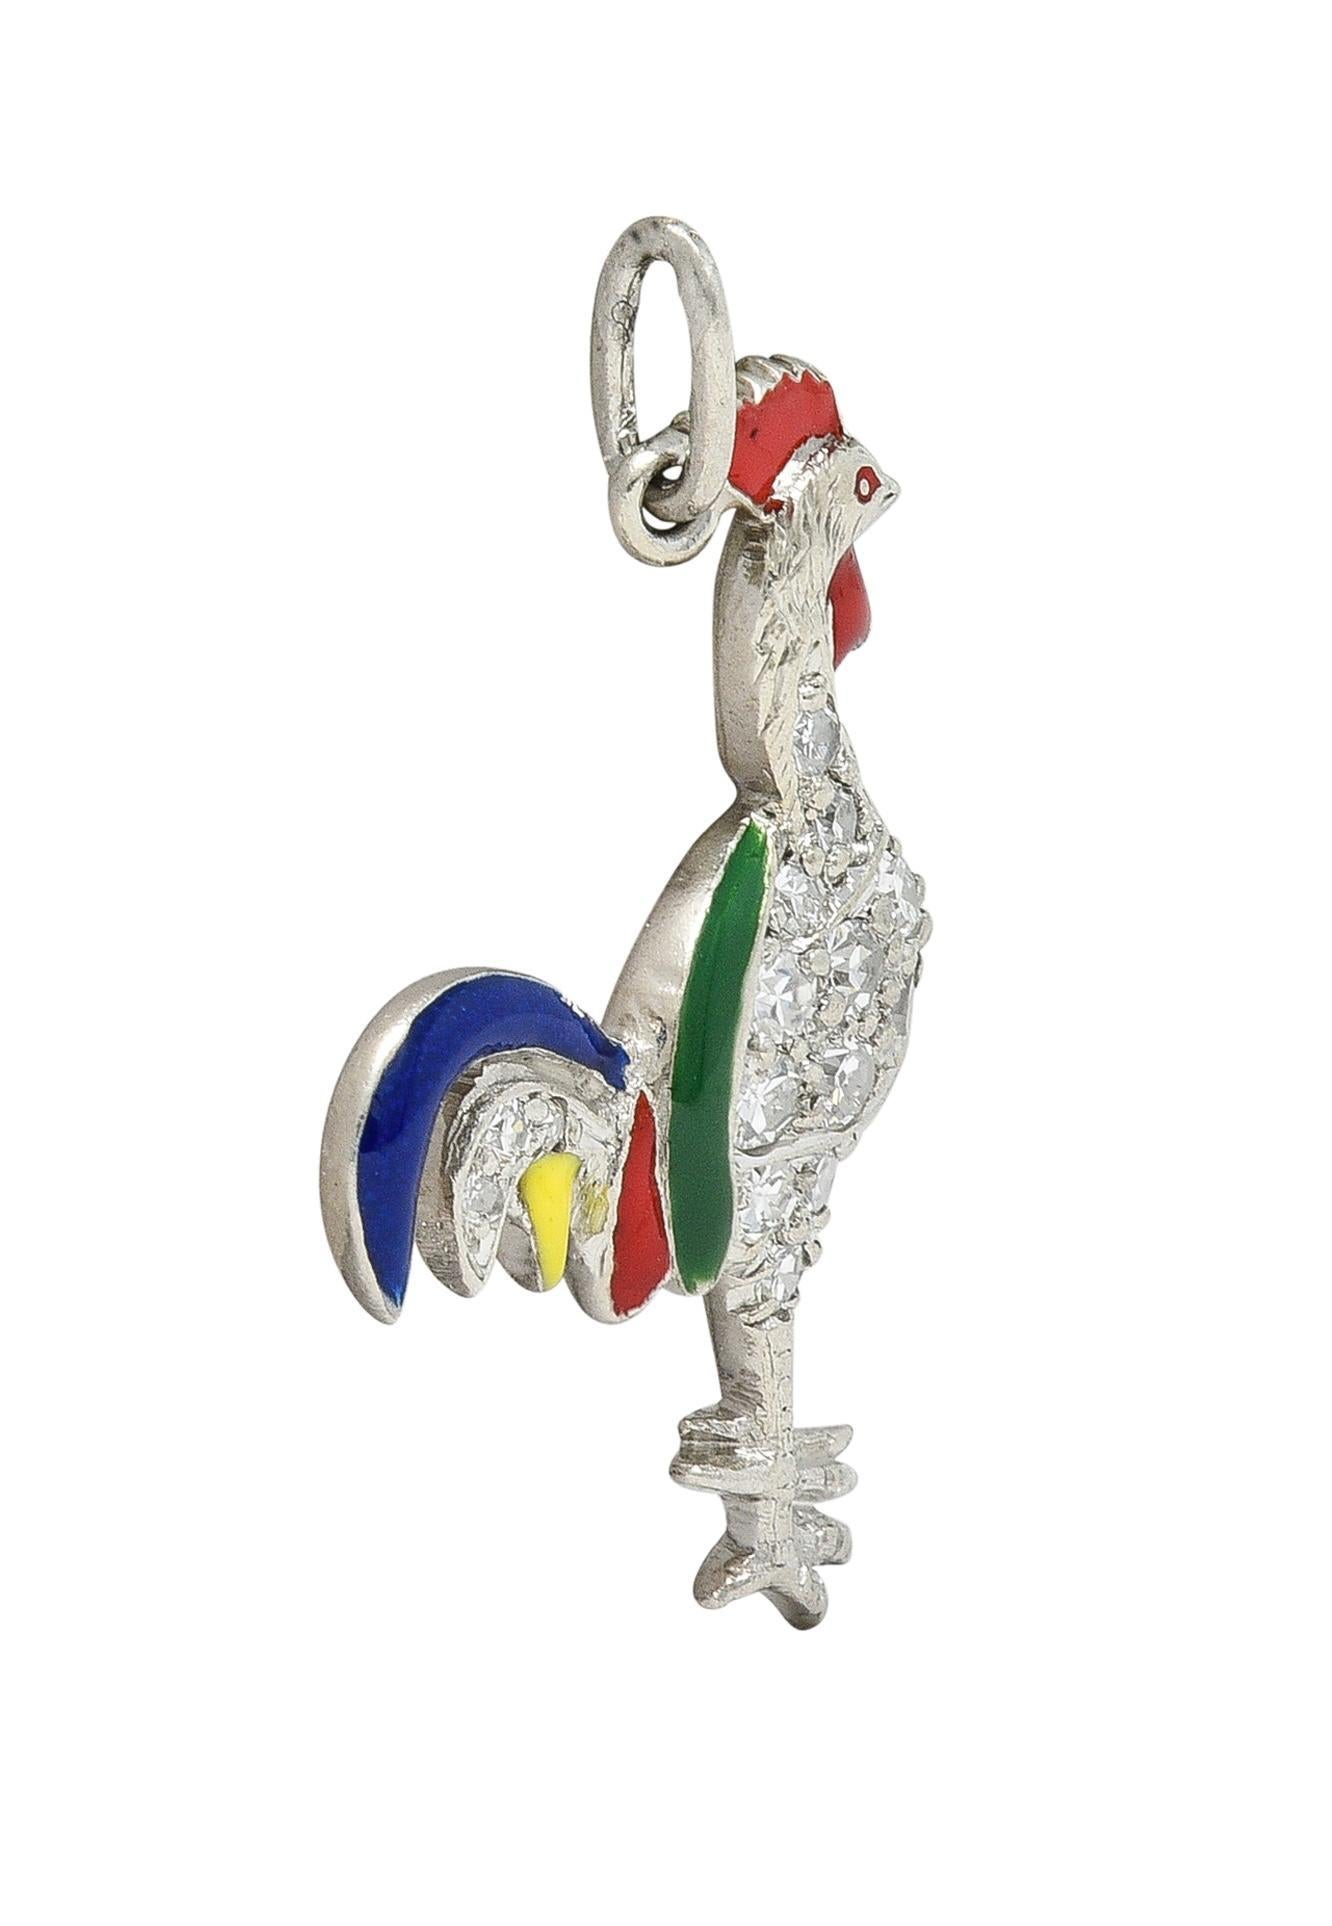 Designed as a stylized rooster with enamel feathers throughout
Opaque glossy red, yellow, blue, and green - minimal loss
With single cut diamonds pavé set throughout body
Weighing approximately 0.20 carat total 
Eye clean and bright 
Completed by